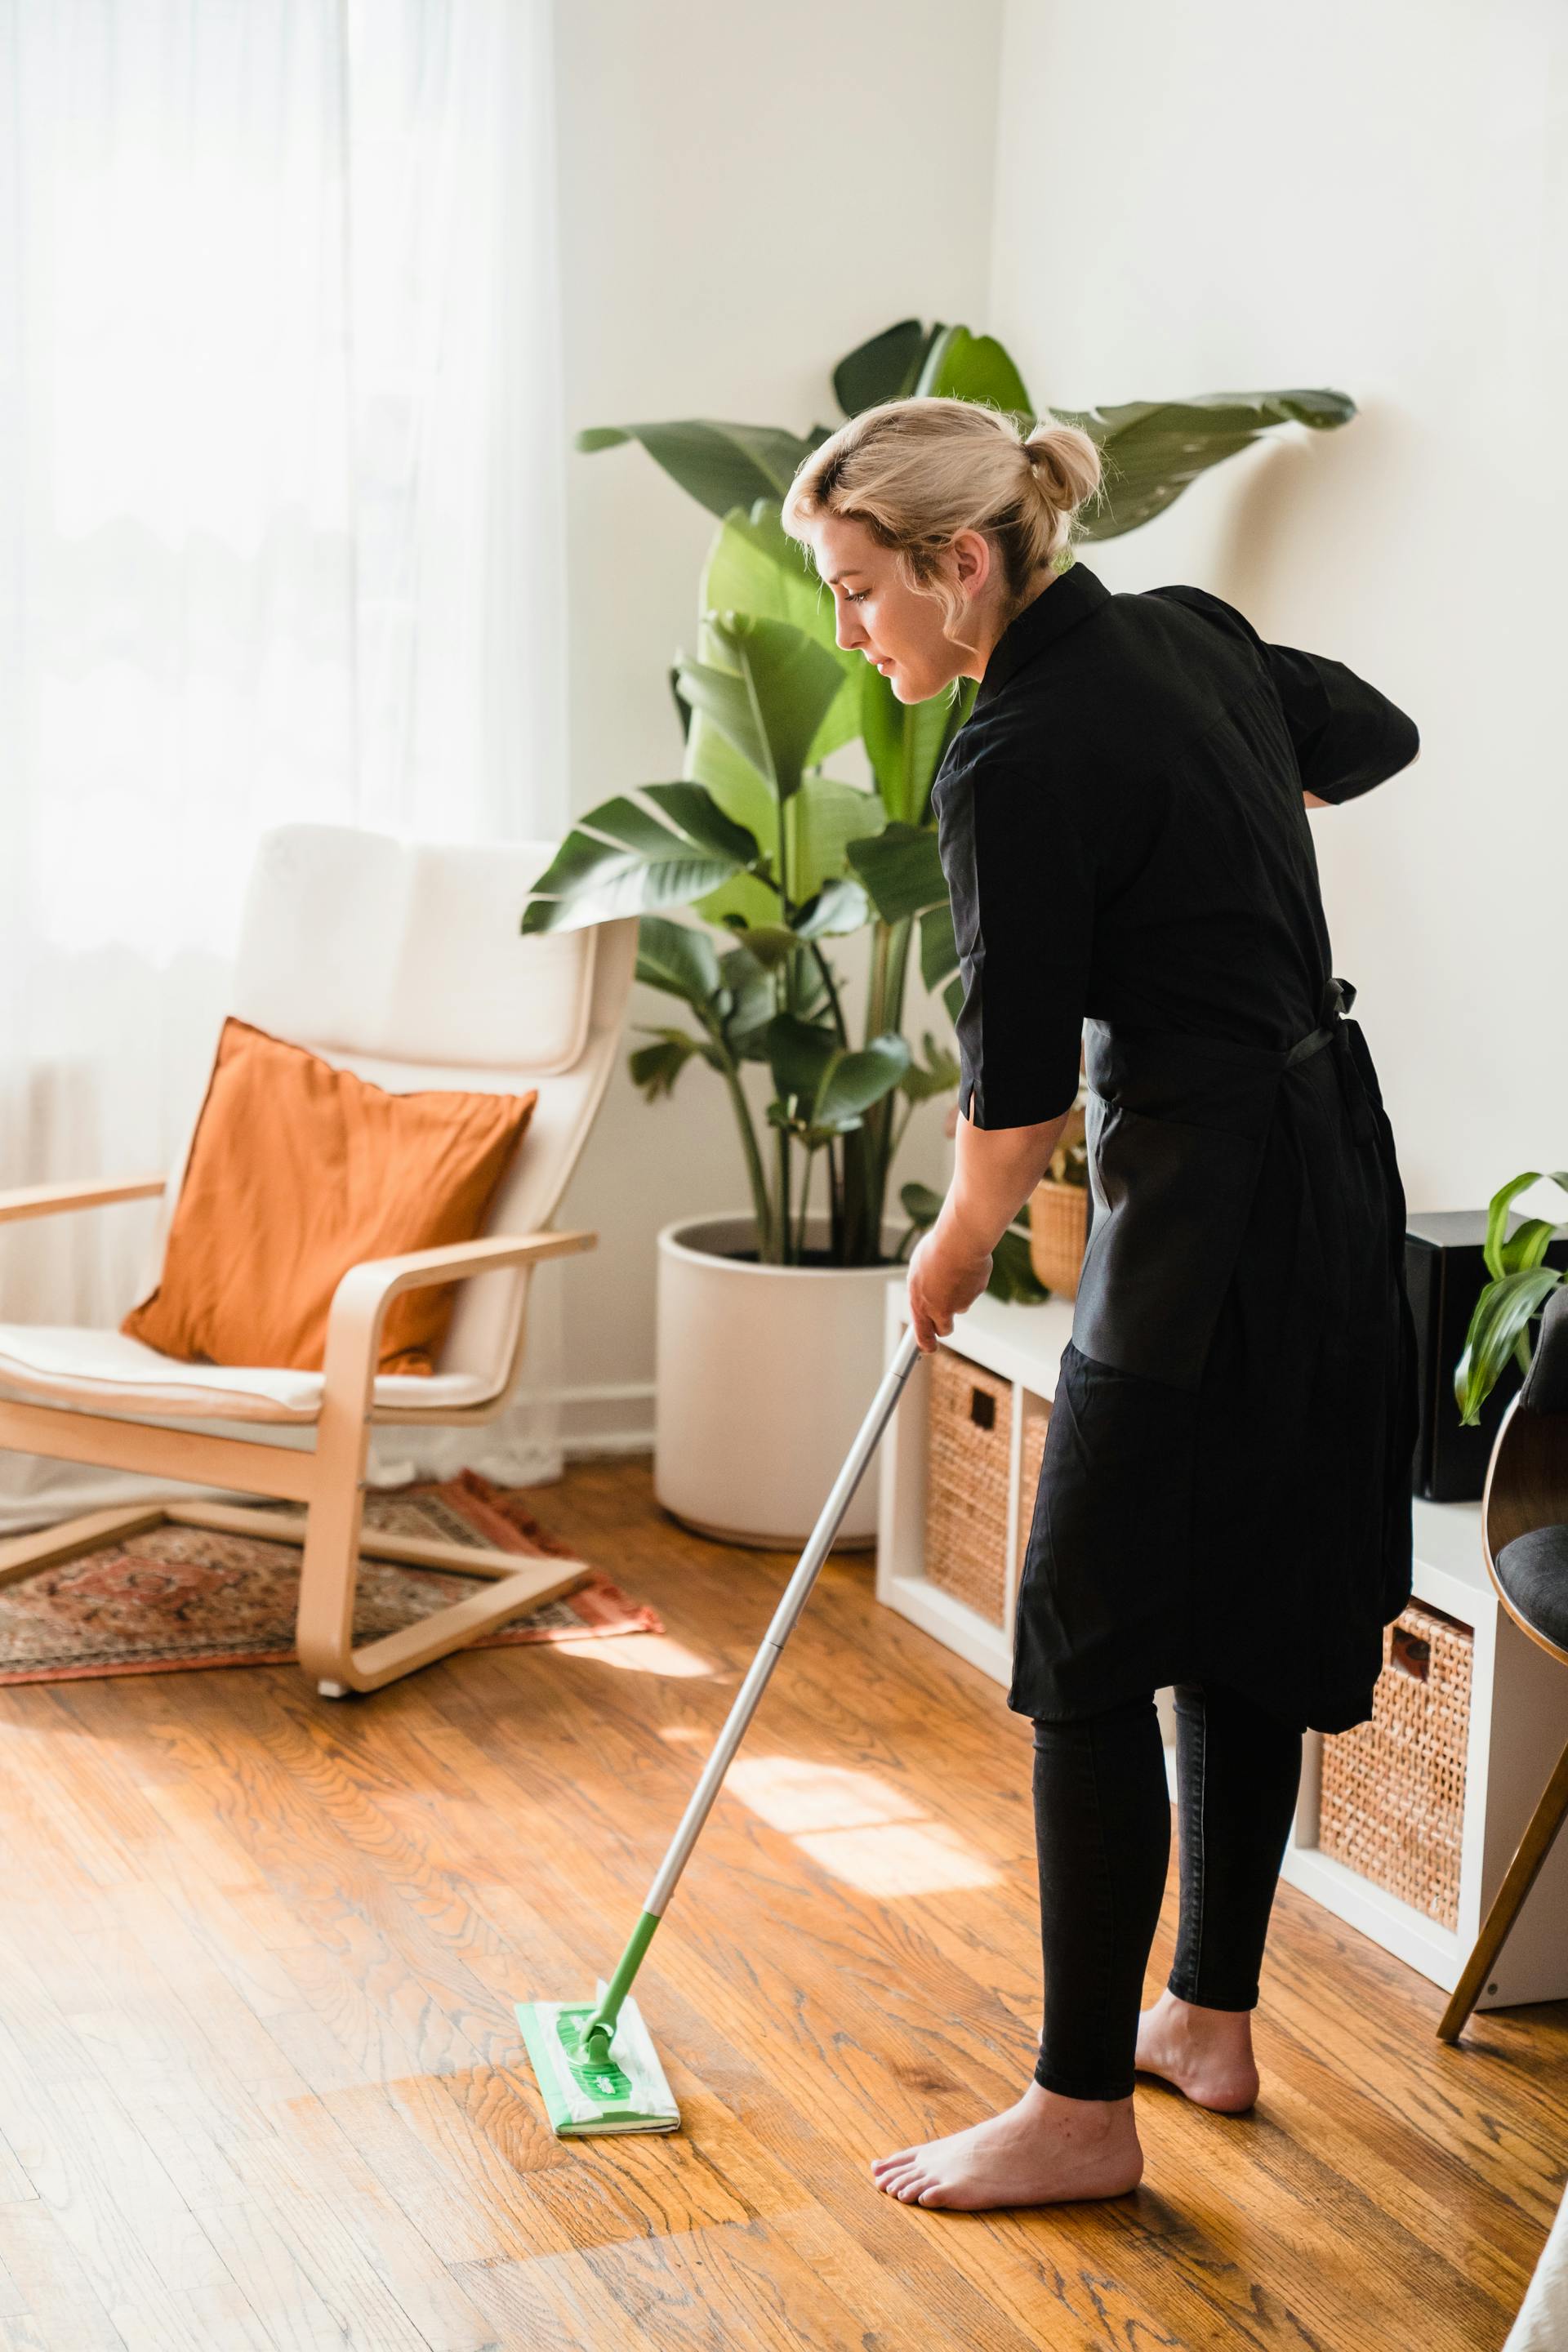 A woman sweeping the floor | Source: Pexels